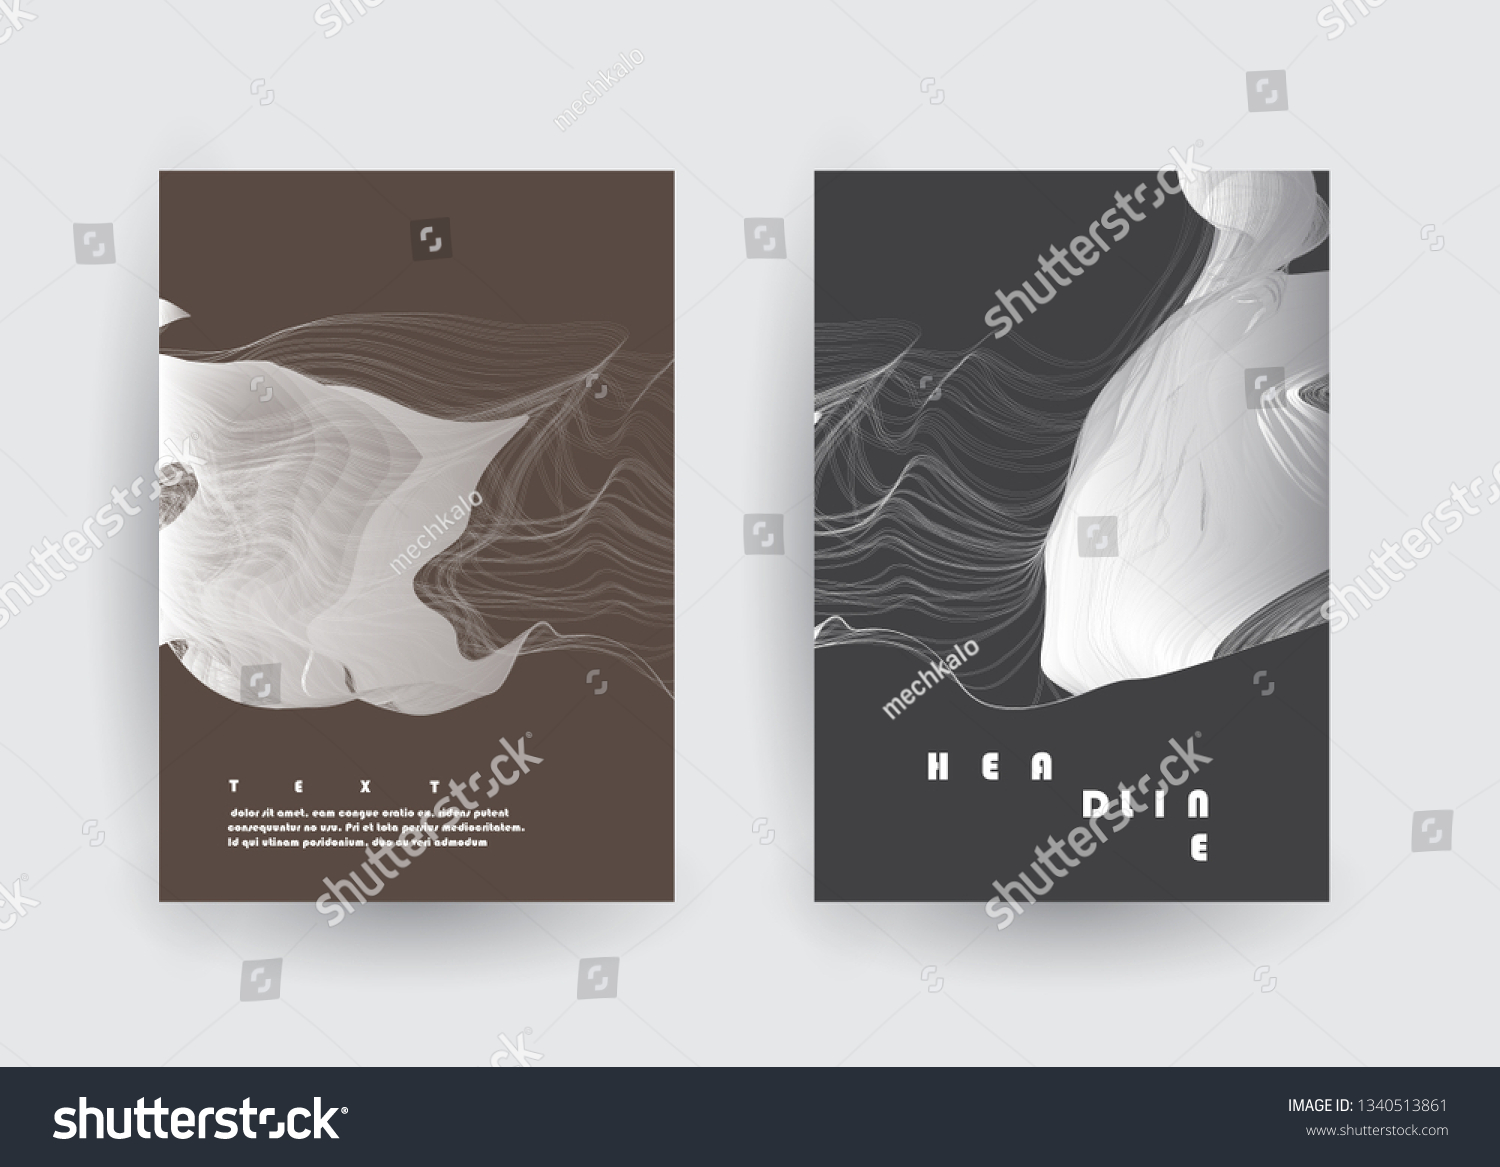 Covers templates set with graphic geometric elements. Applicable for brochures, posters, covers and banners. Vector illustrations. #1340513861